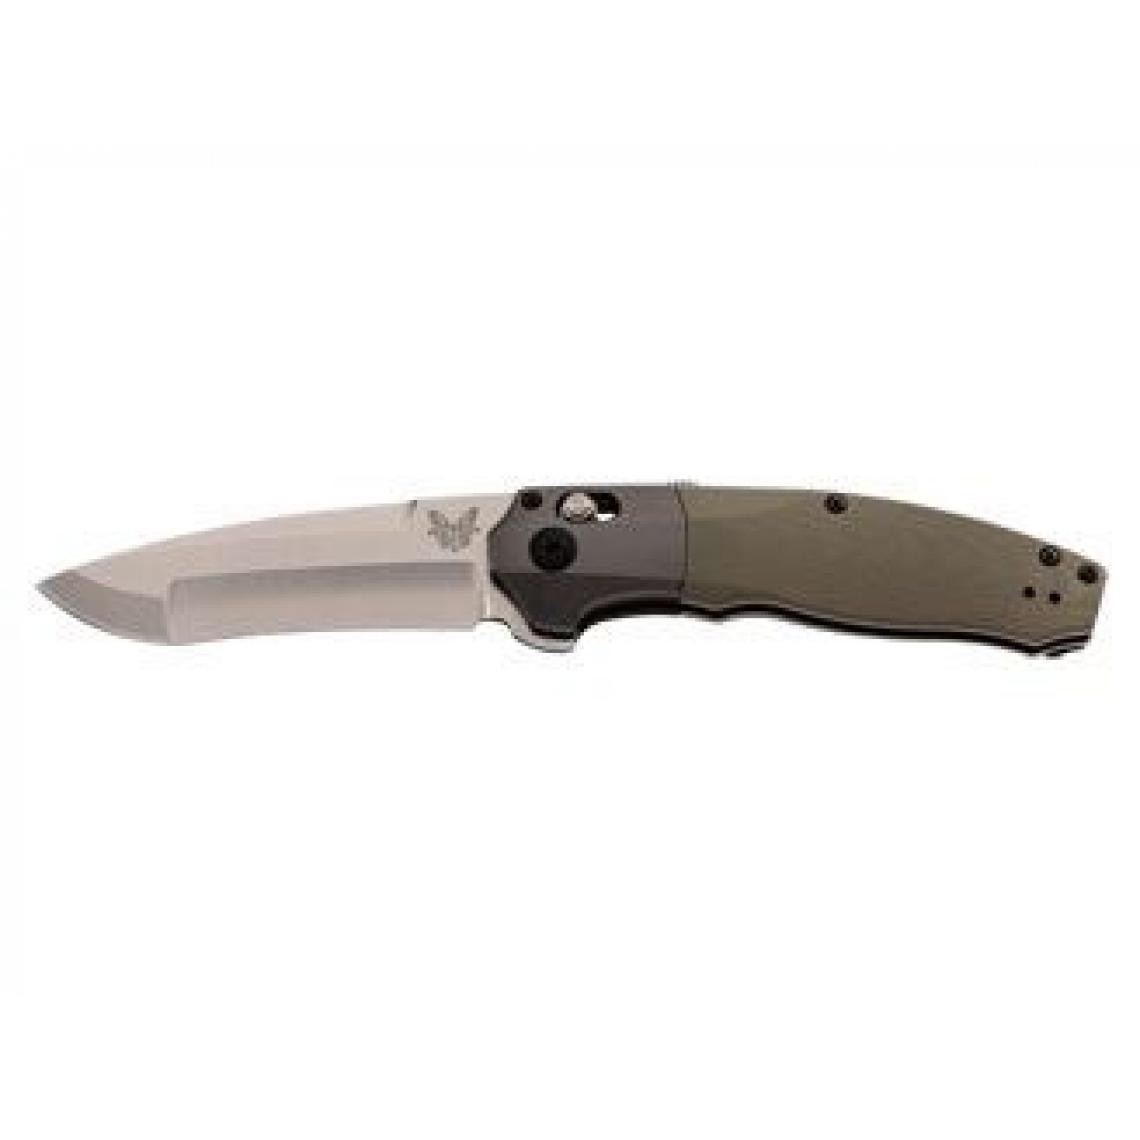 Divers Marques - Benchmade VECTOR DROP POINT 496 - Outils de coupe